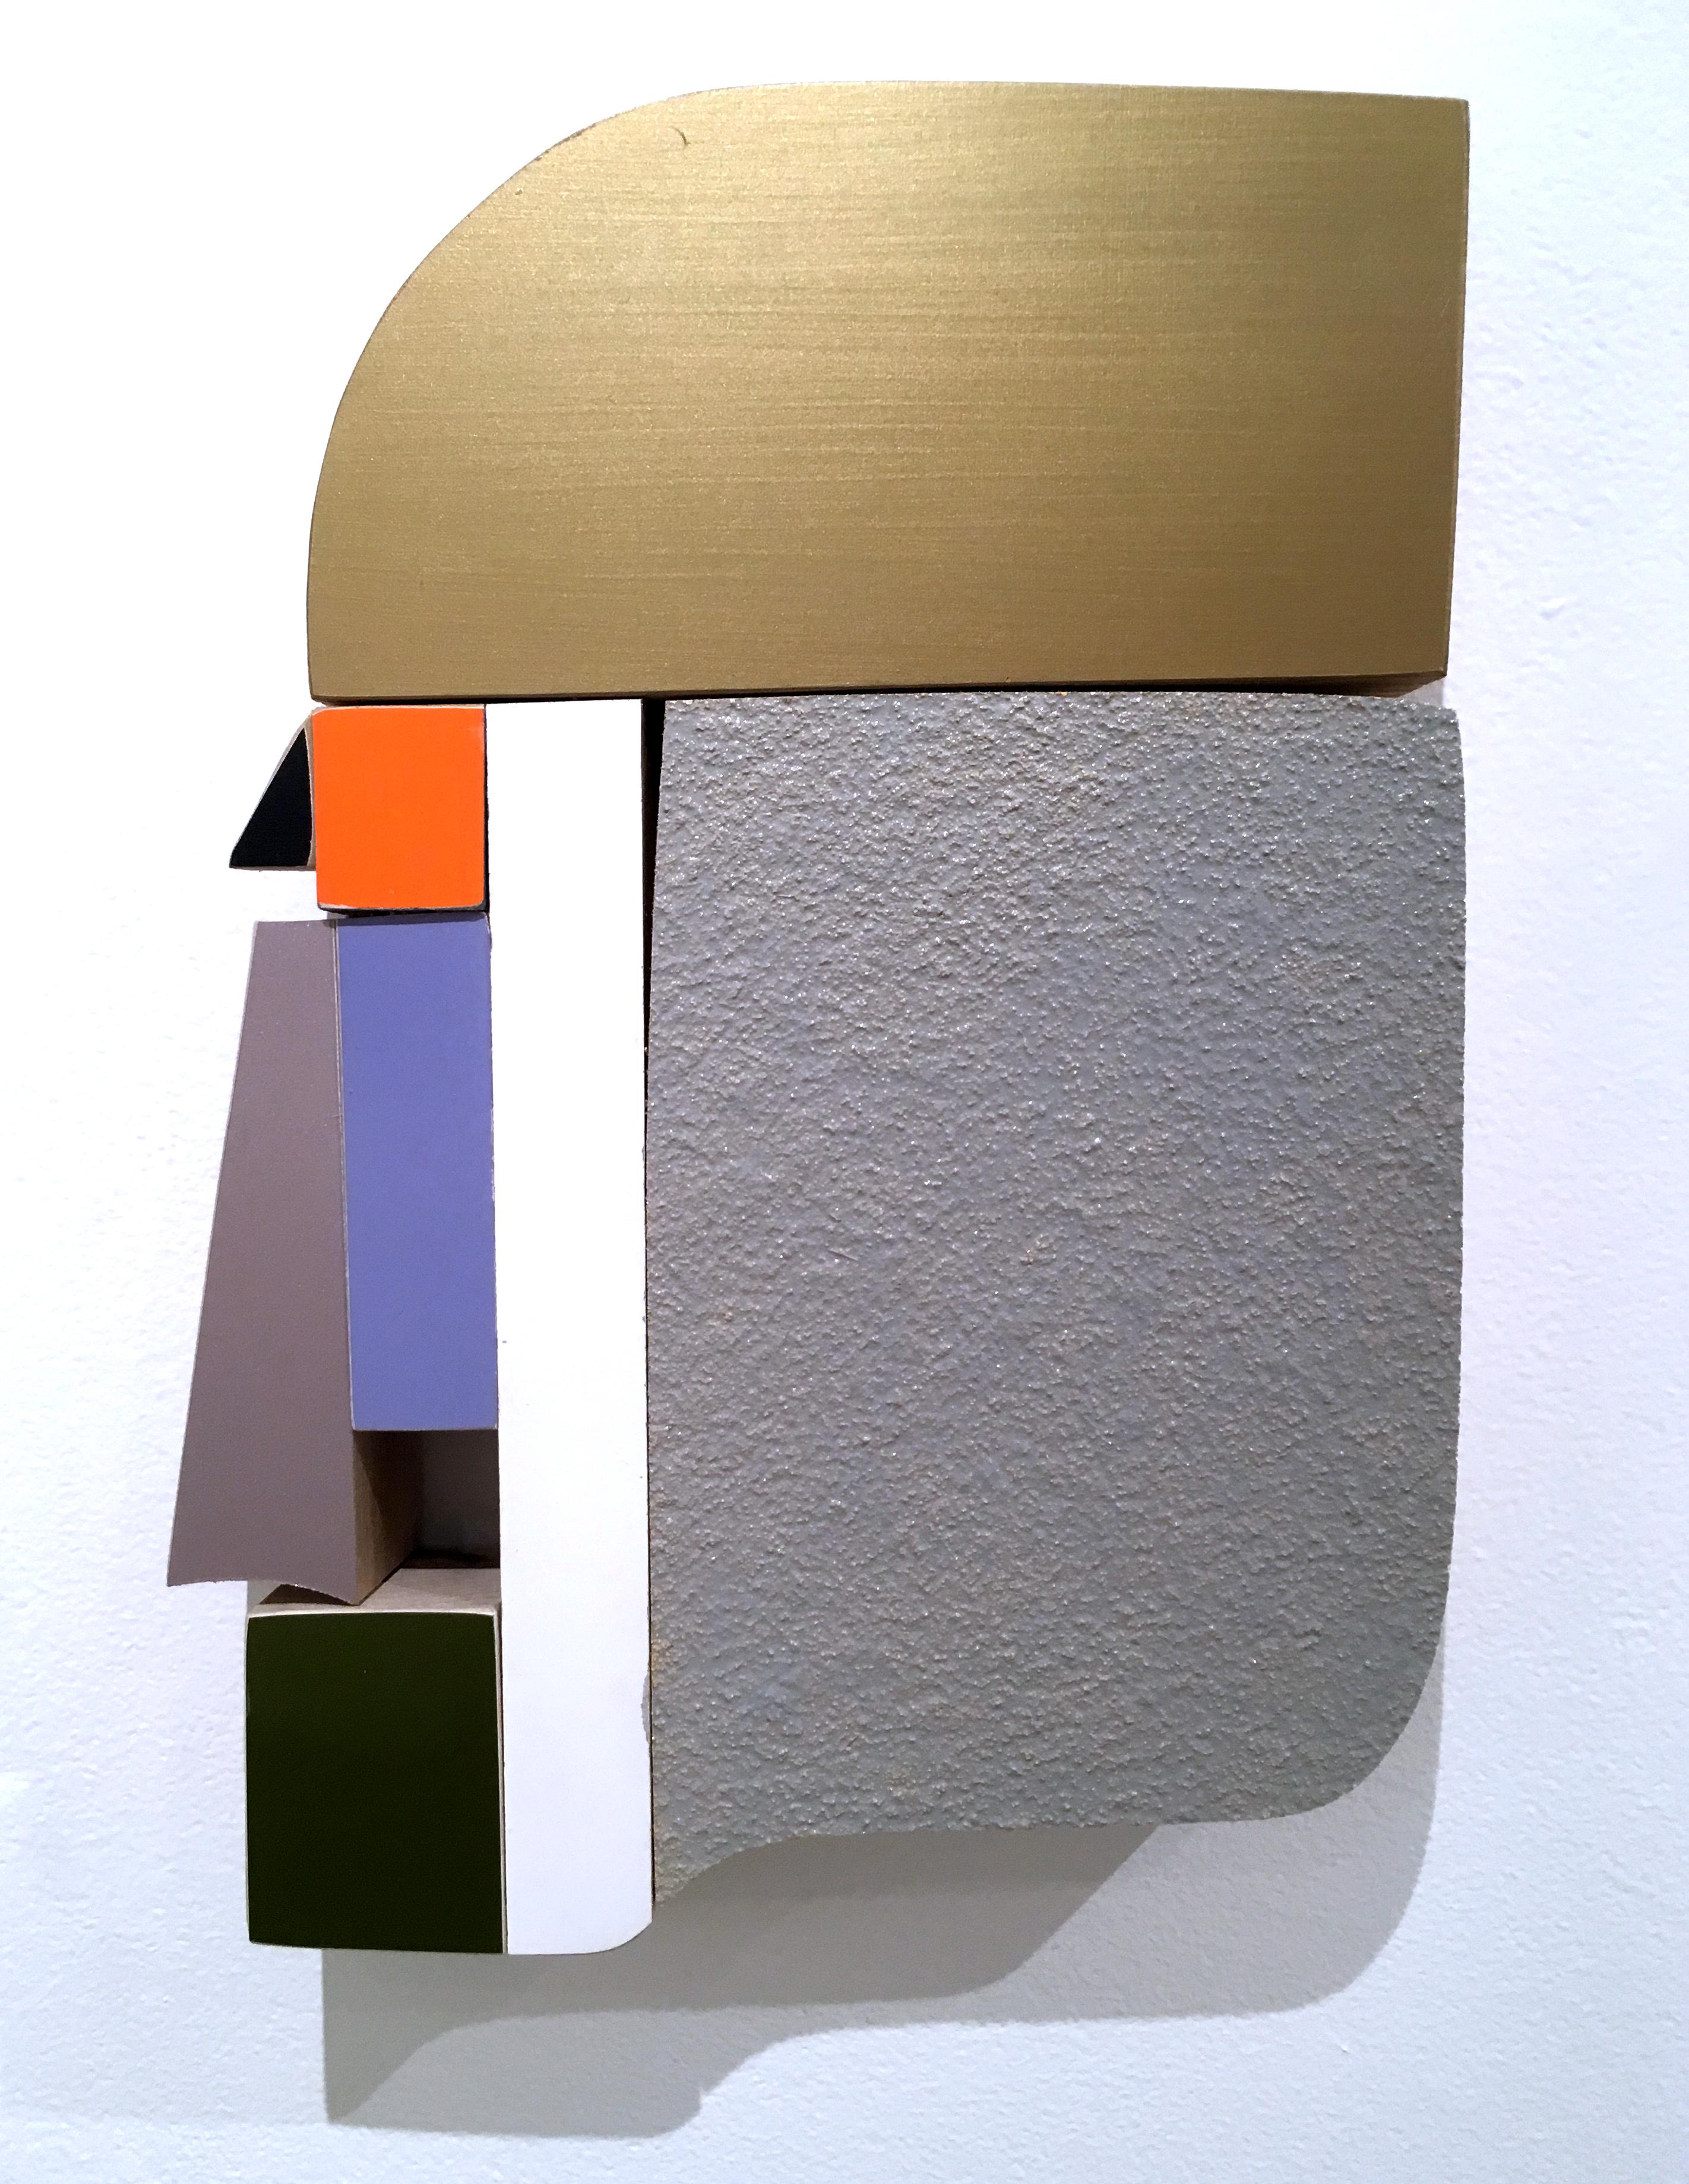 Profile, wood, wall sculpture, acrylic, purples, texture, abstract geometric